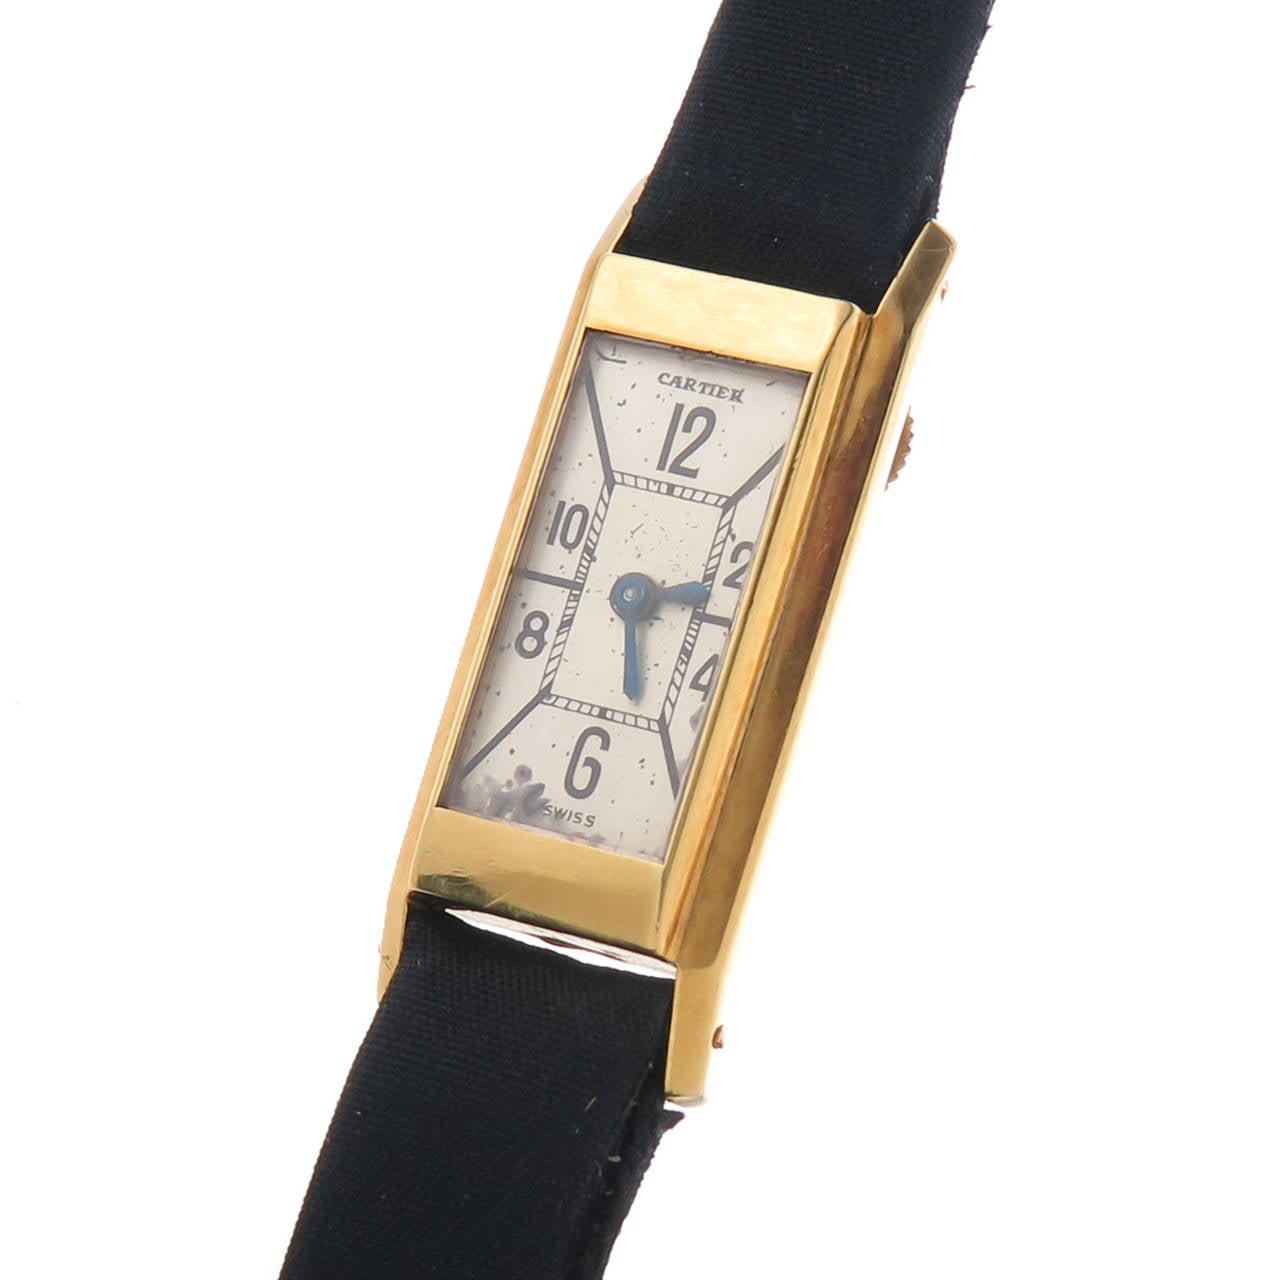 Circa late 1930s Cartier 18K Yellow Gold Back Wind Ladies Wrist Watch. Case Measuring 1 1/2 inch in length and 1/2 inch wide. Manual wind EWC, European Watch and Clock movement. Original Dial with some minor spotting. Case back having French Control